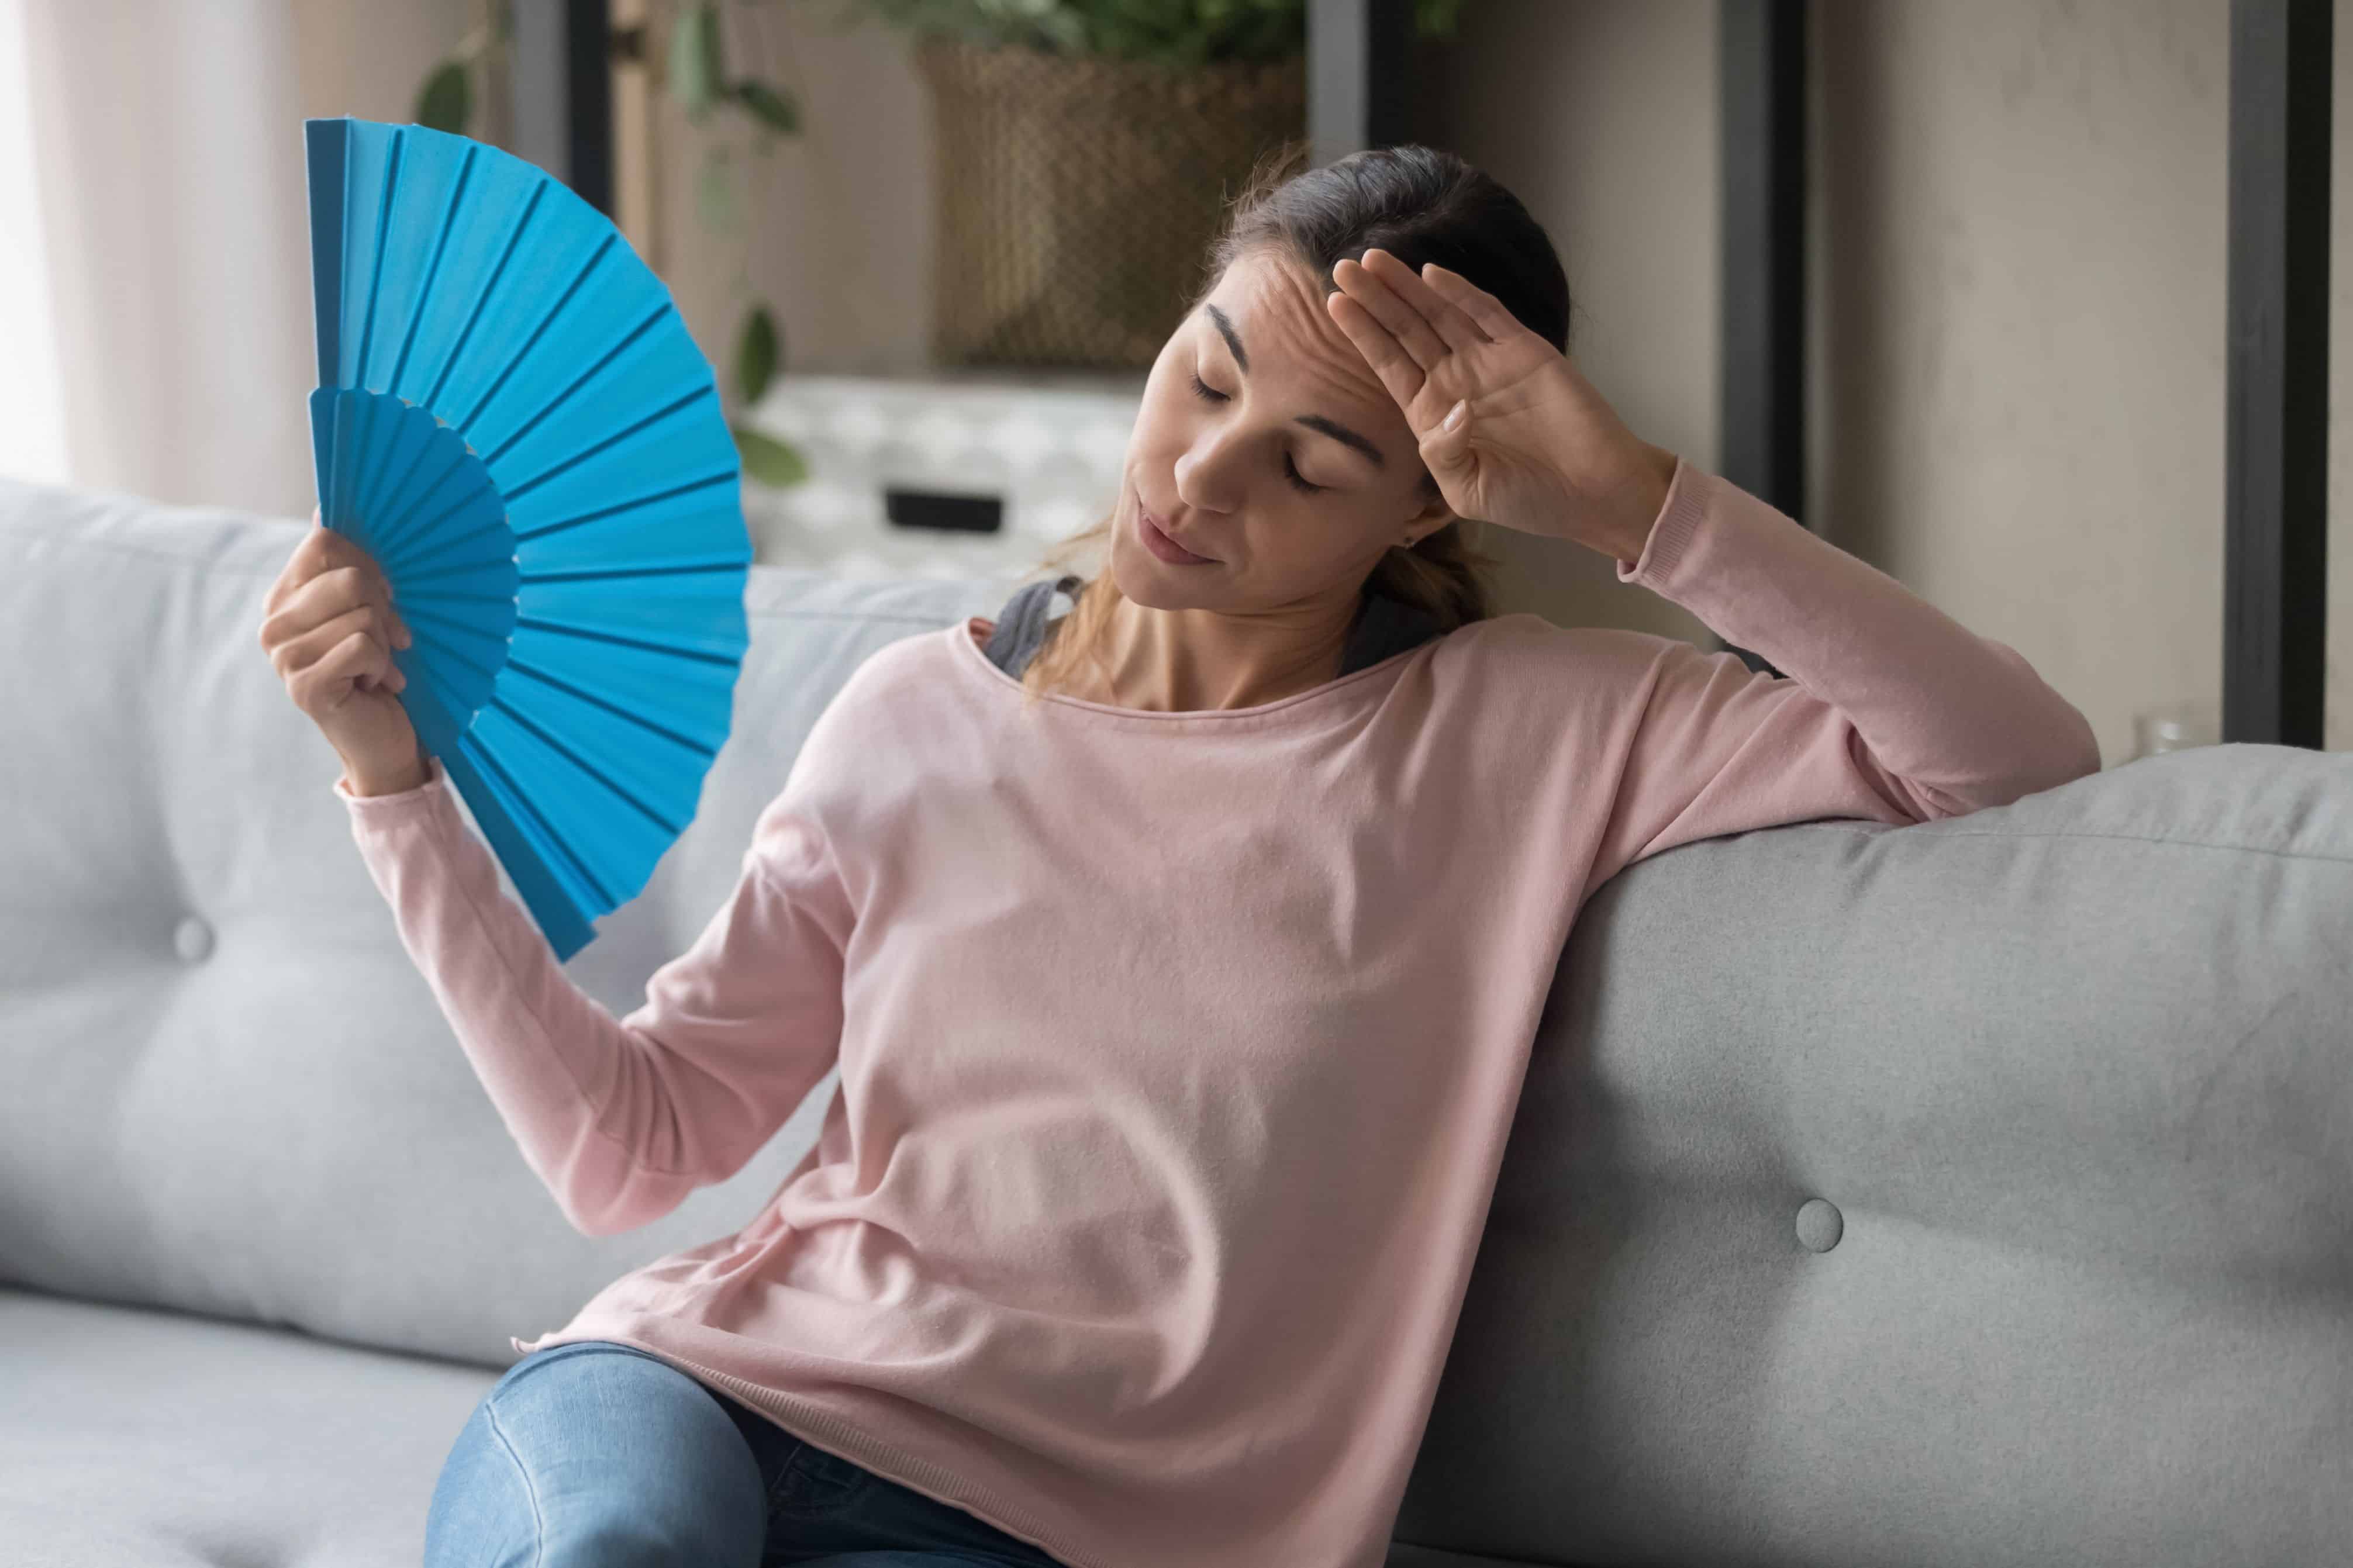 Overheated female sitting on couch in living room at hot summer weather day feeling discomfort suffers from heat waving blue fan to cool herself, girl sweating dwelling without air conditioner concept